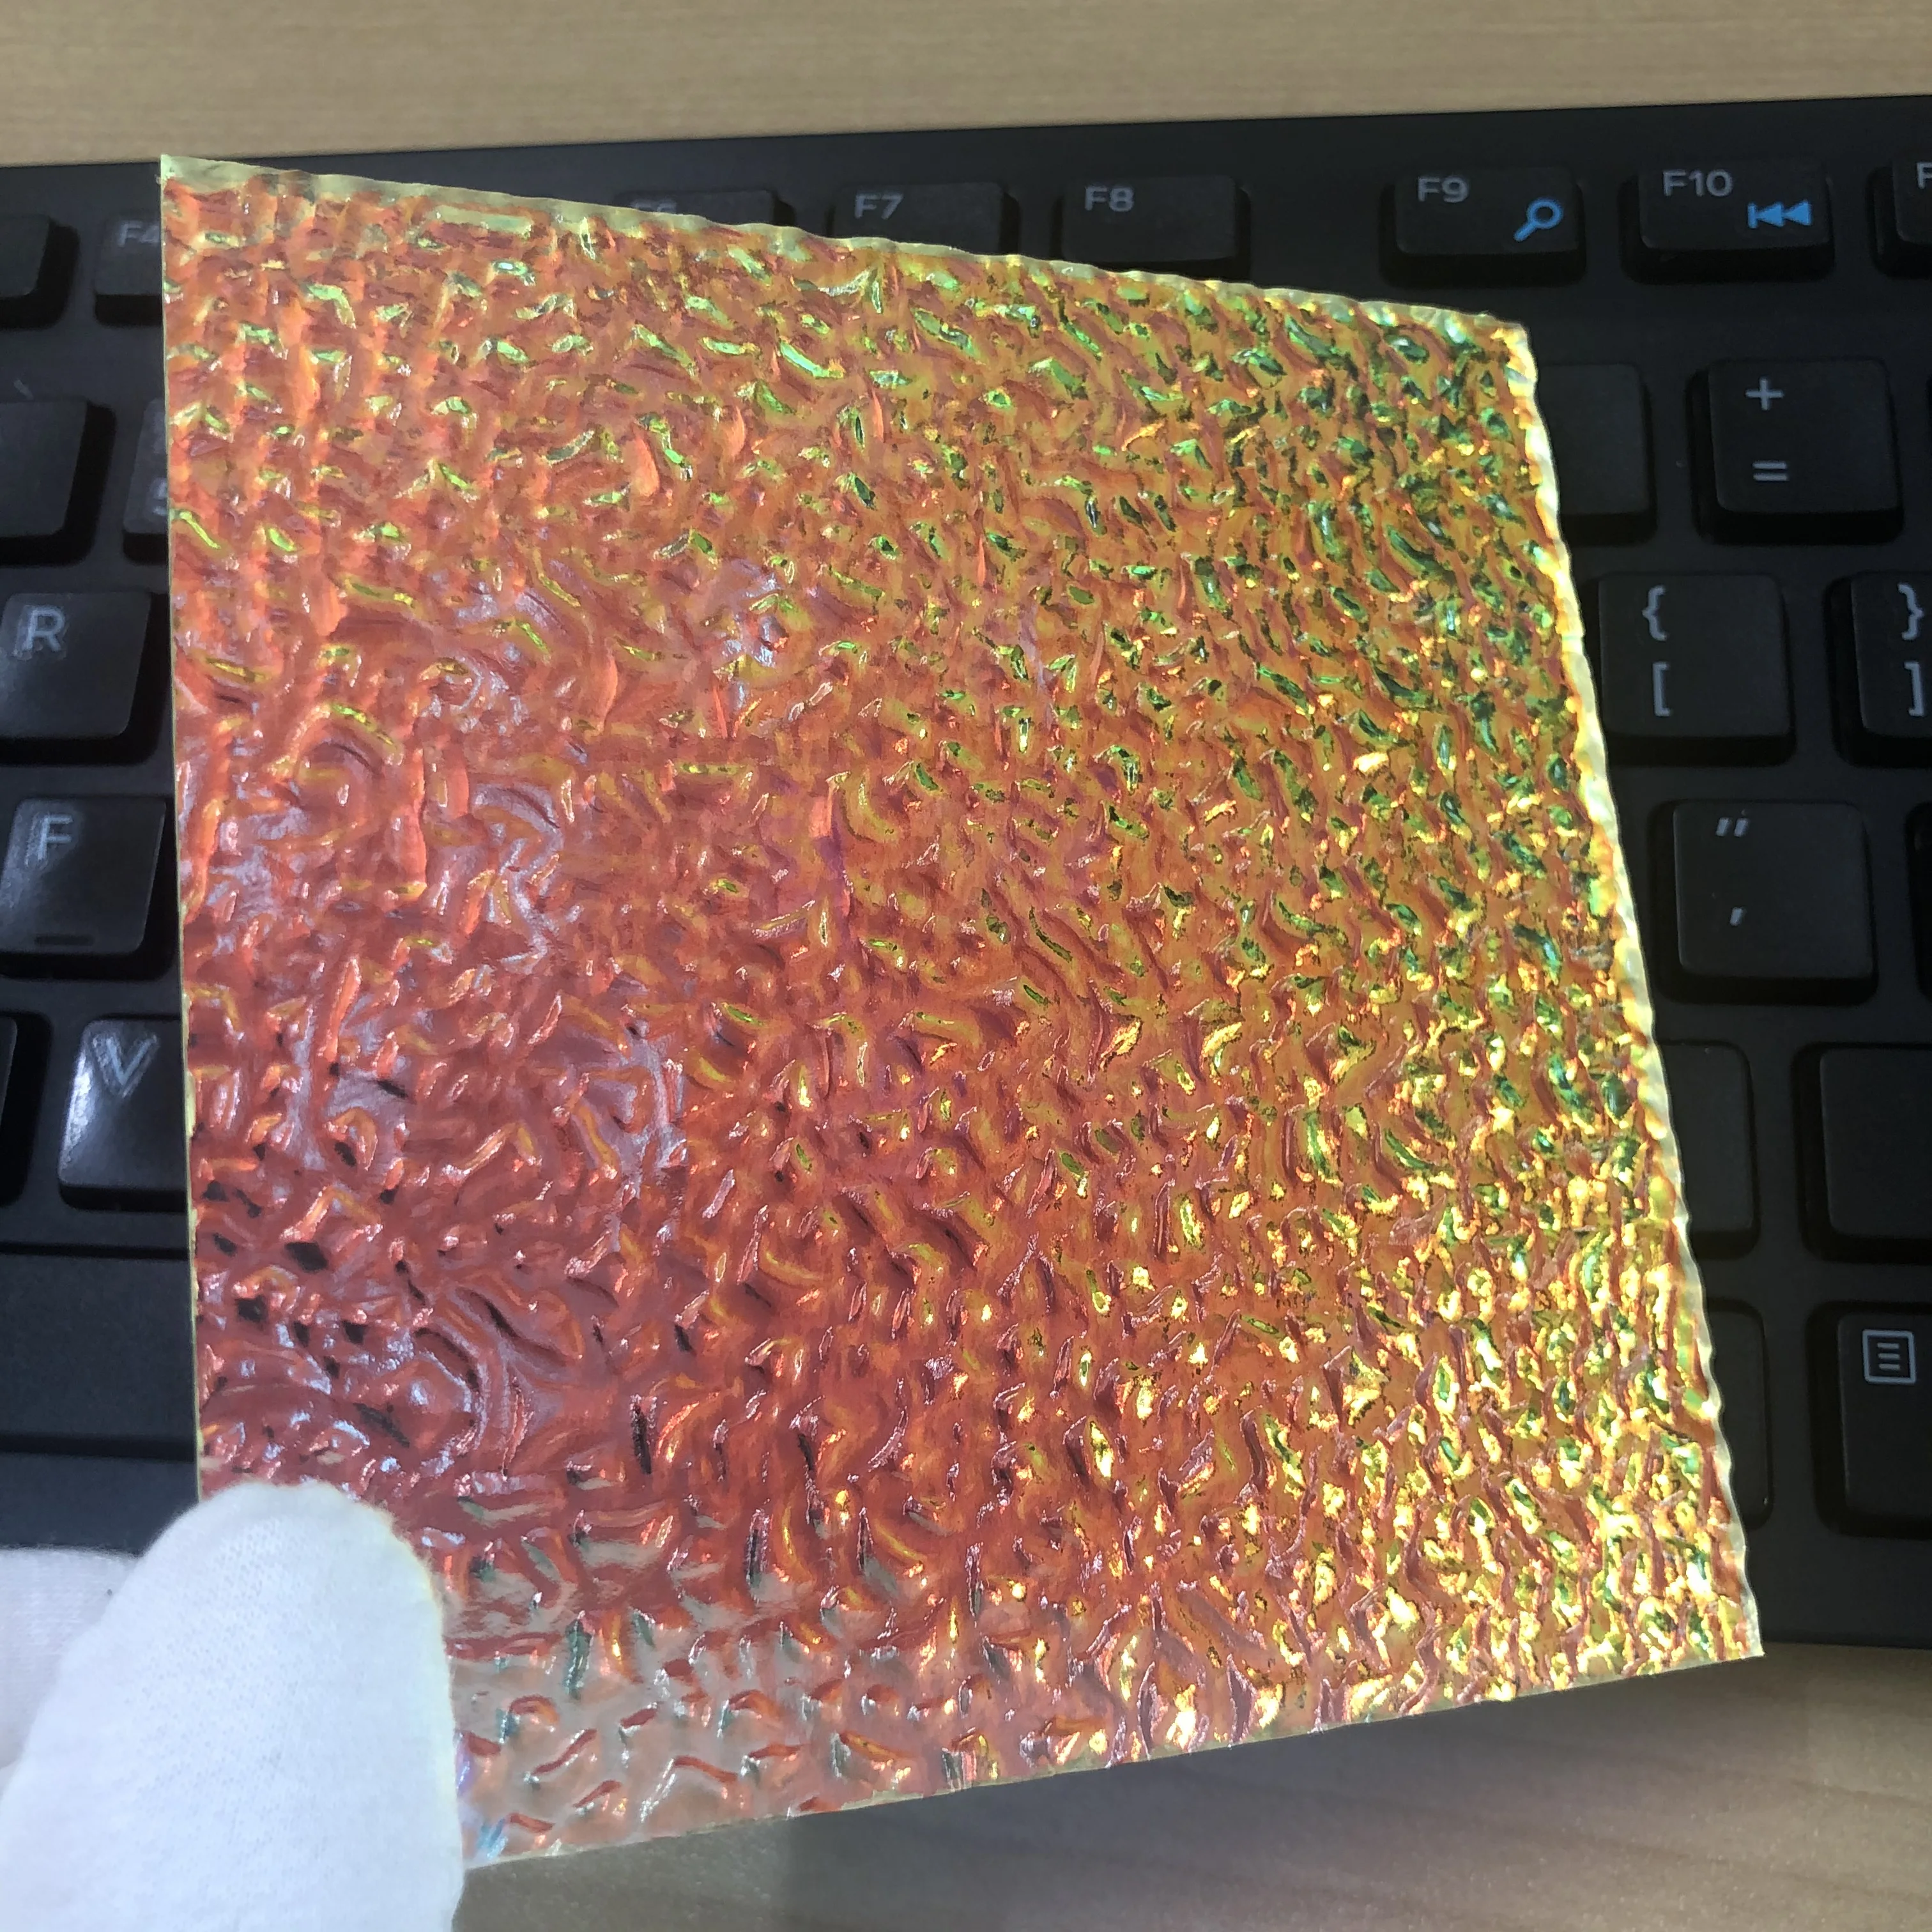 3.0mm Thick PMMA, 2-Sided Holographic Glitter Acrylic Sheet/Plexiglass,  Suitable For Decorations, Crafts, Jewelry, Etc.